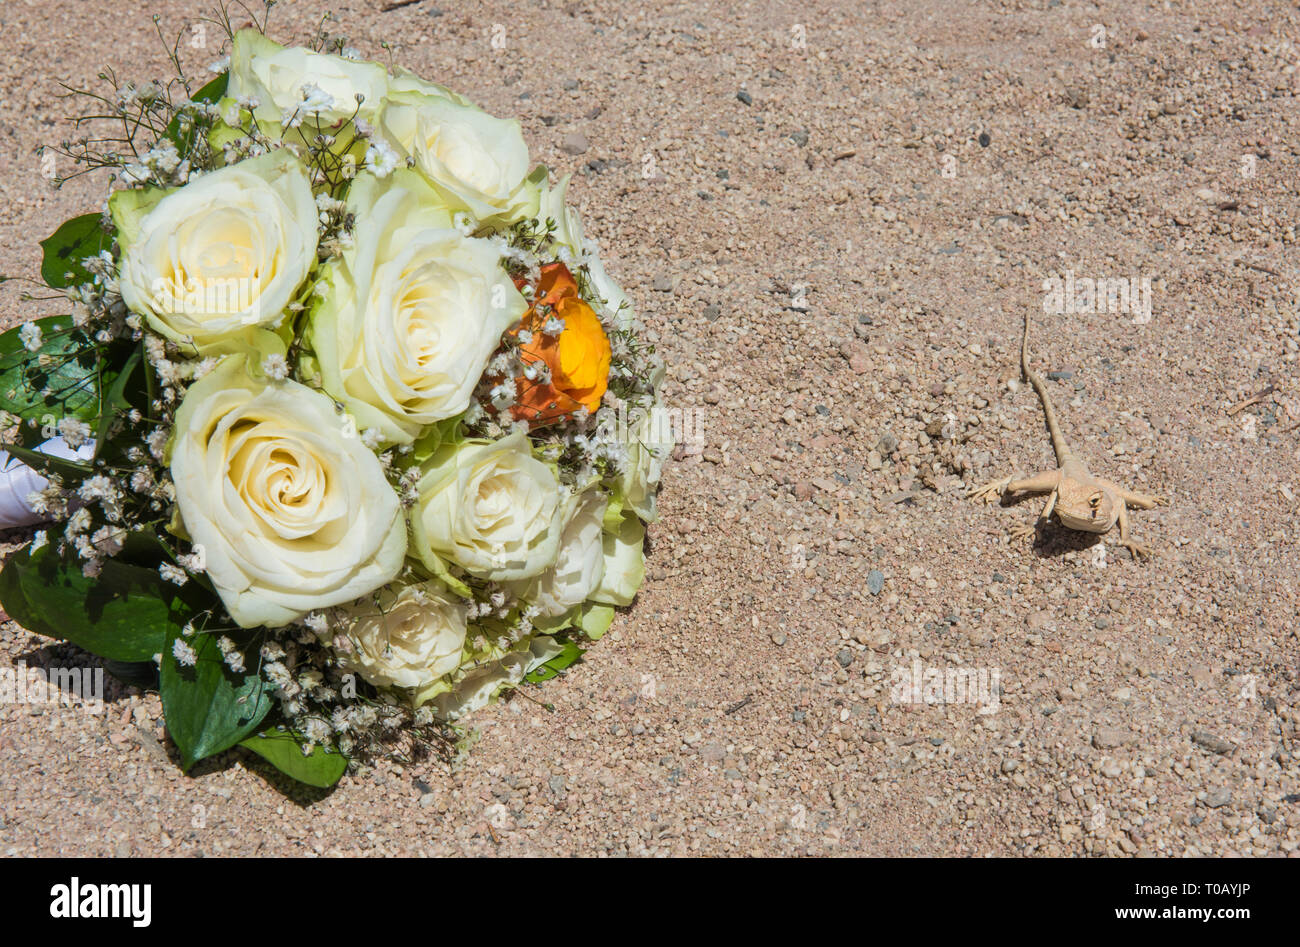 Closeup of egyptian desert agama lizard in harsh arid environment with bouquet of wedding flowers Stock Photo